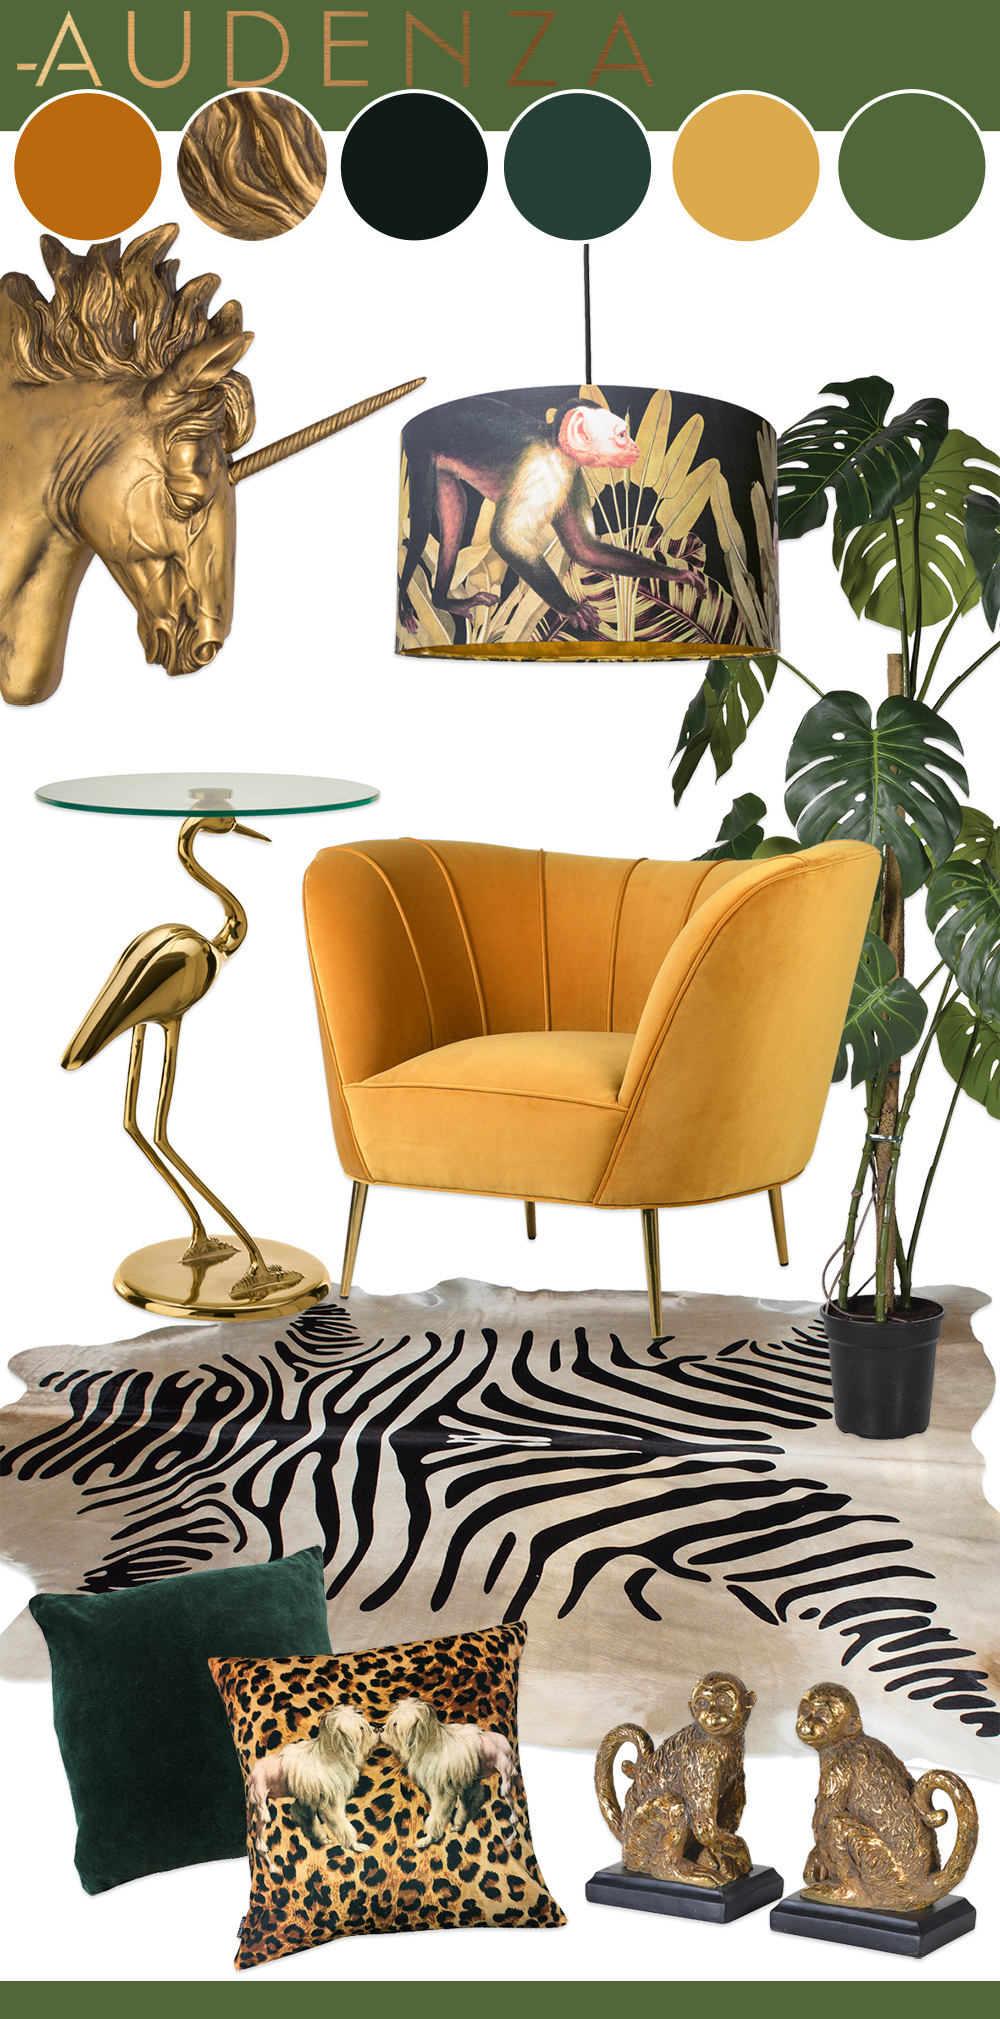 Interior mood board inspiration- green and mustard yellow colour palette with animal prints and faux plants 